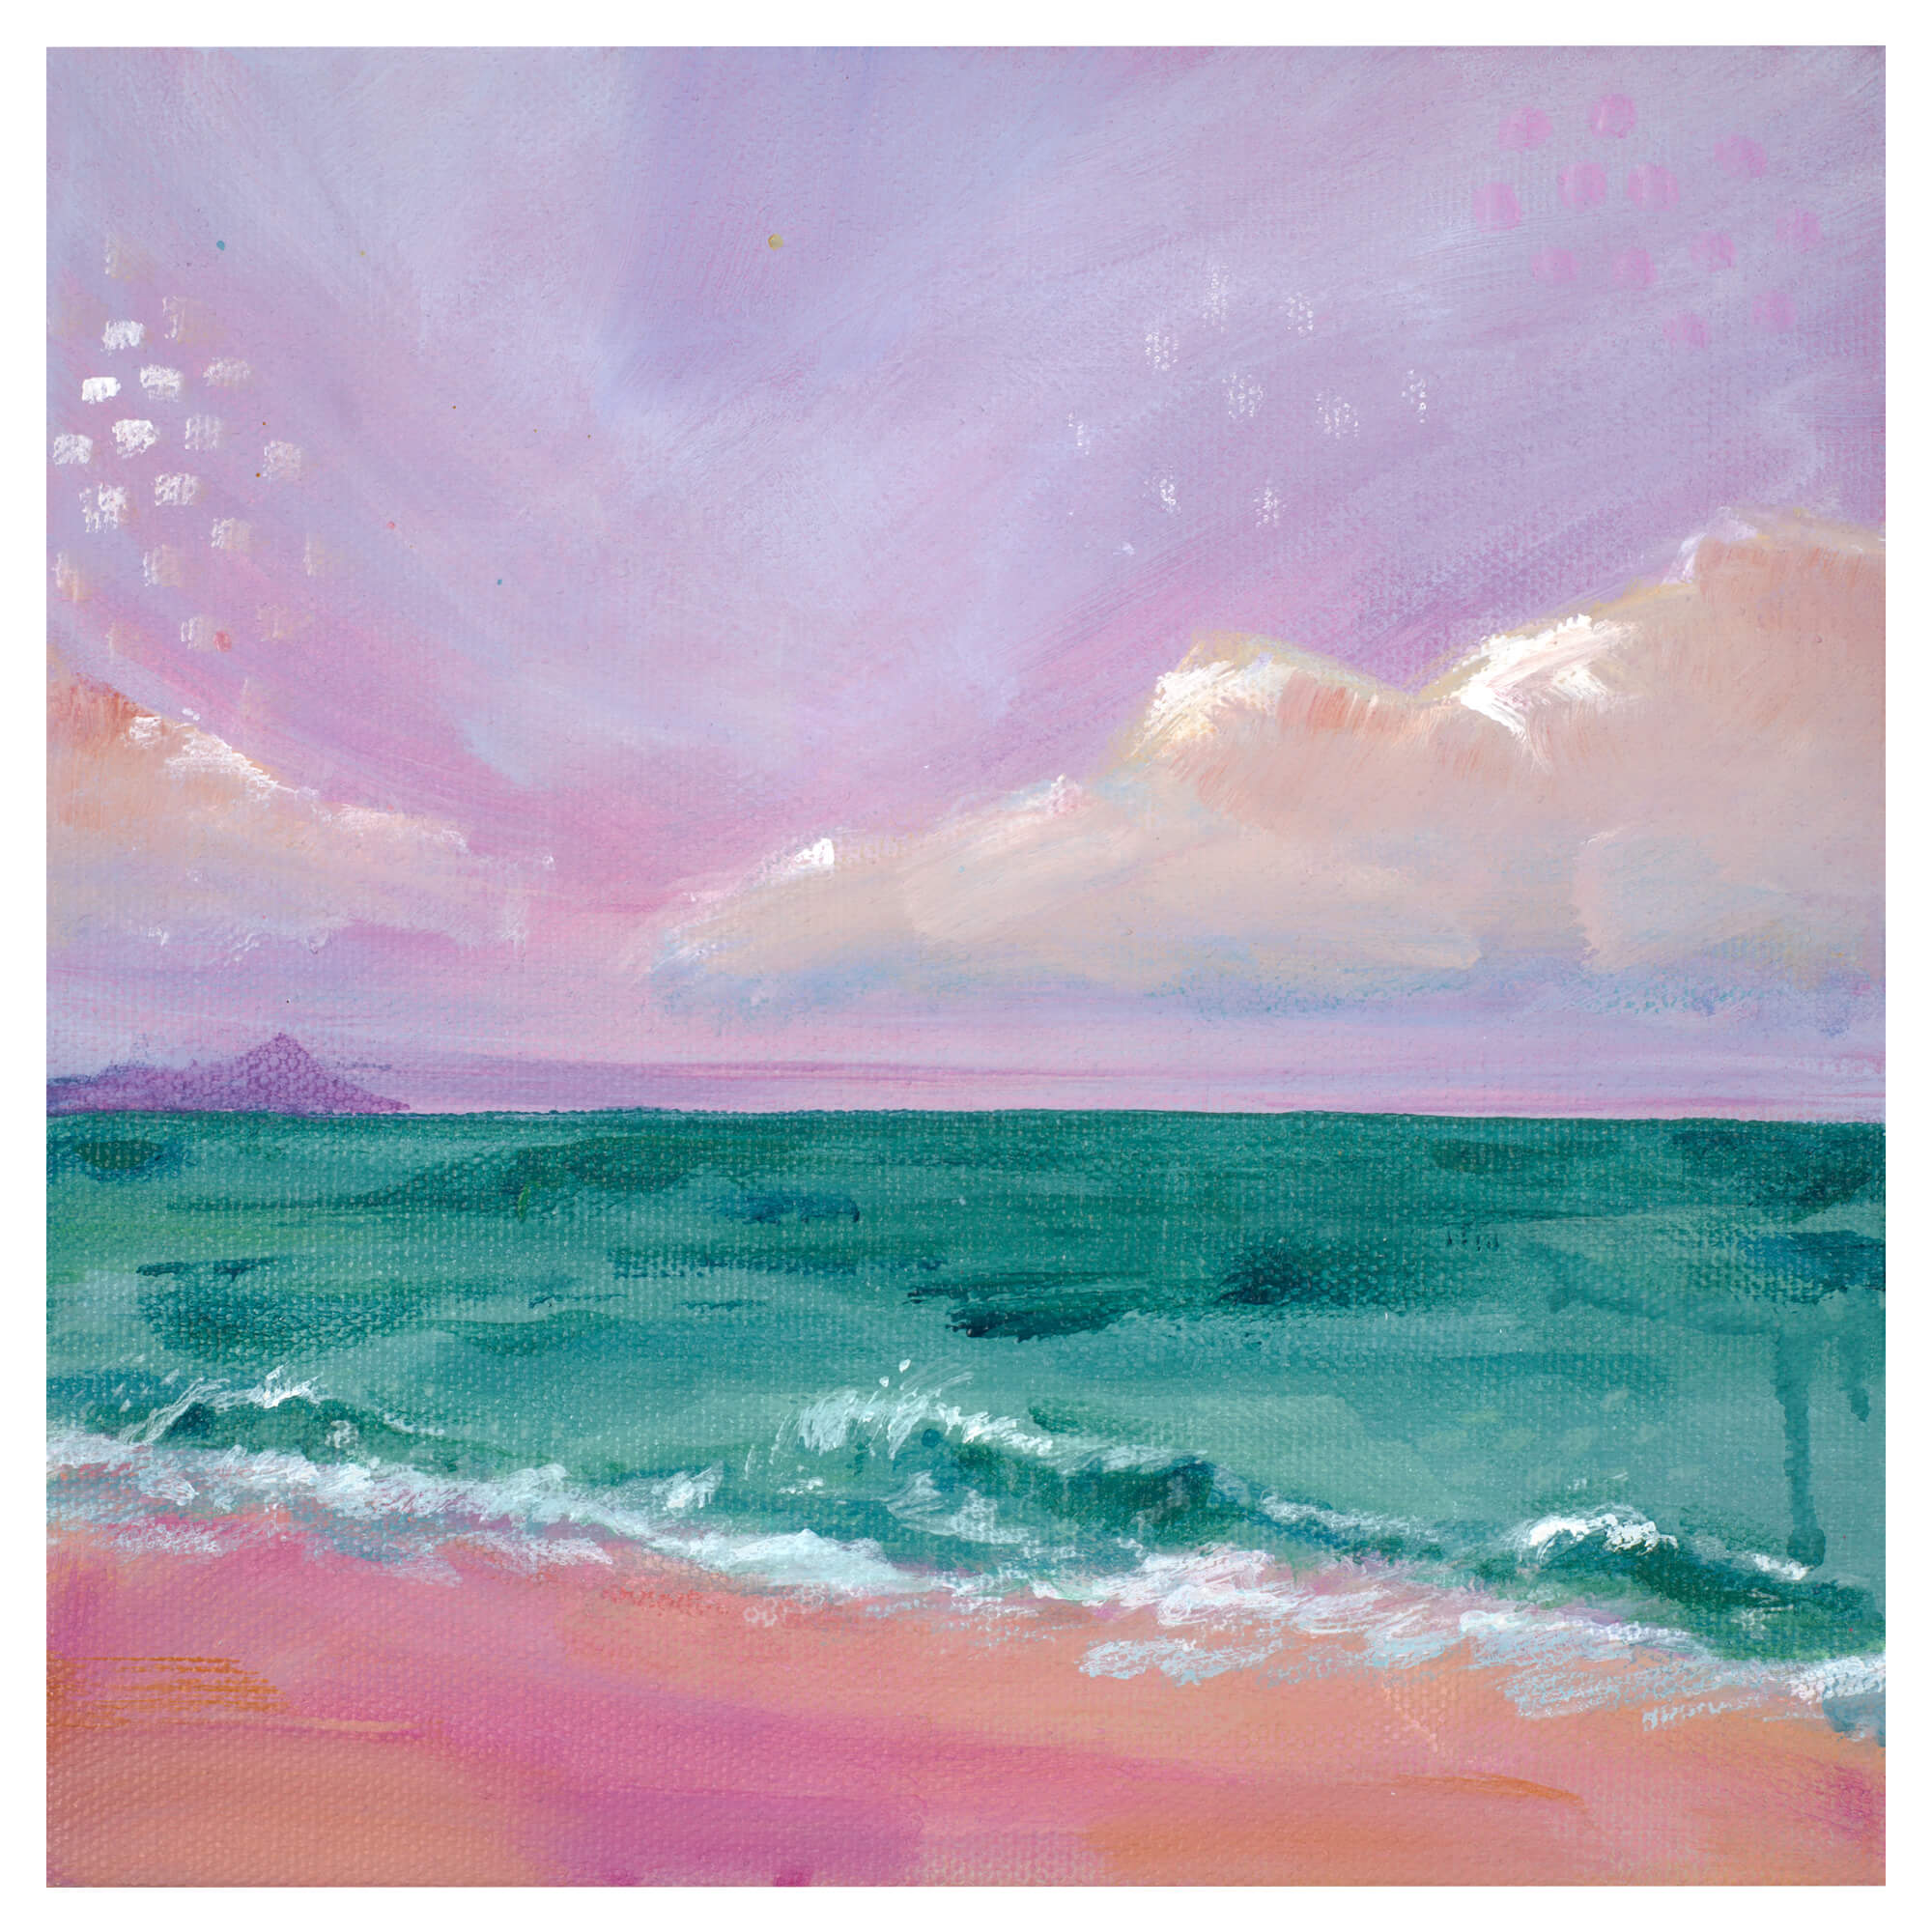 Seascape and horizon with dream-like colors by Hawaii artist Lindsay Wilkins